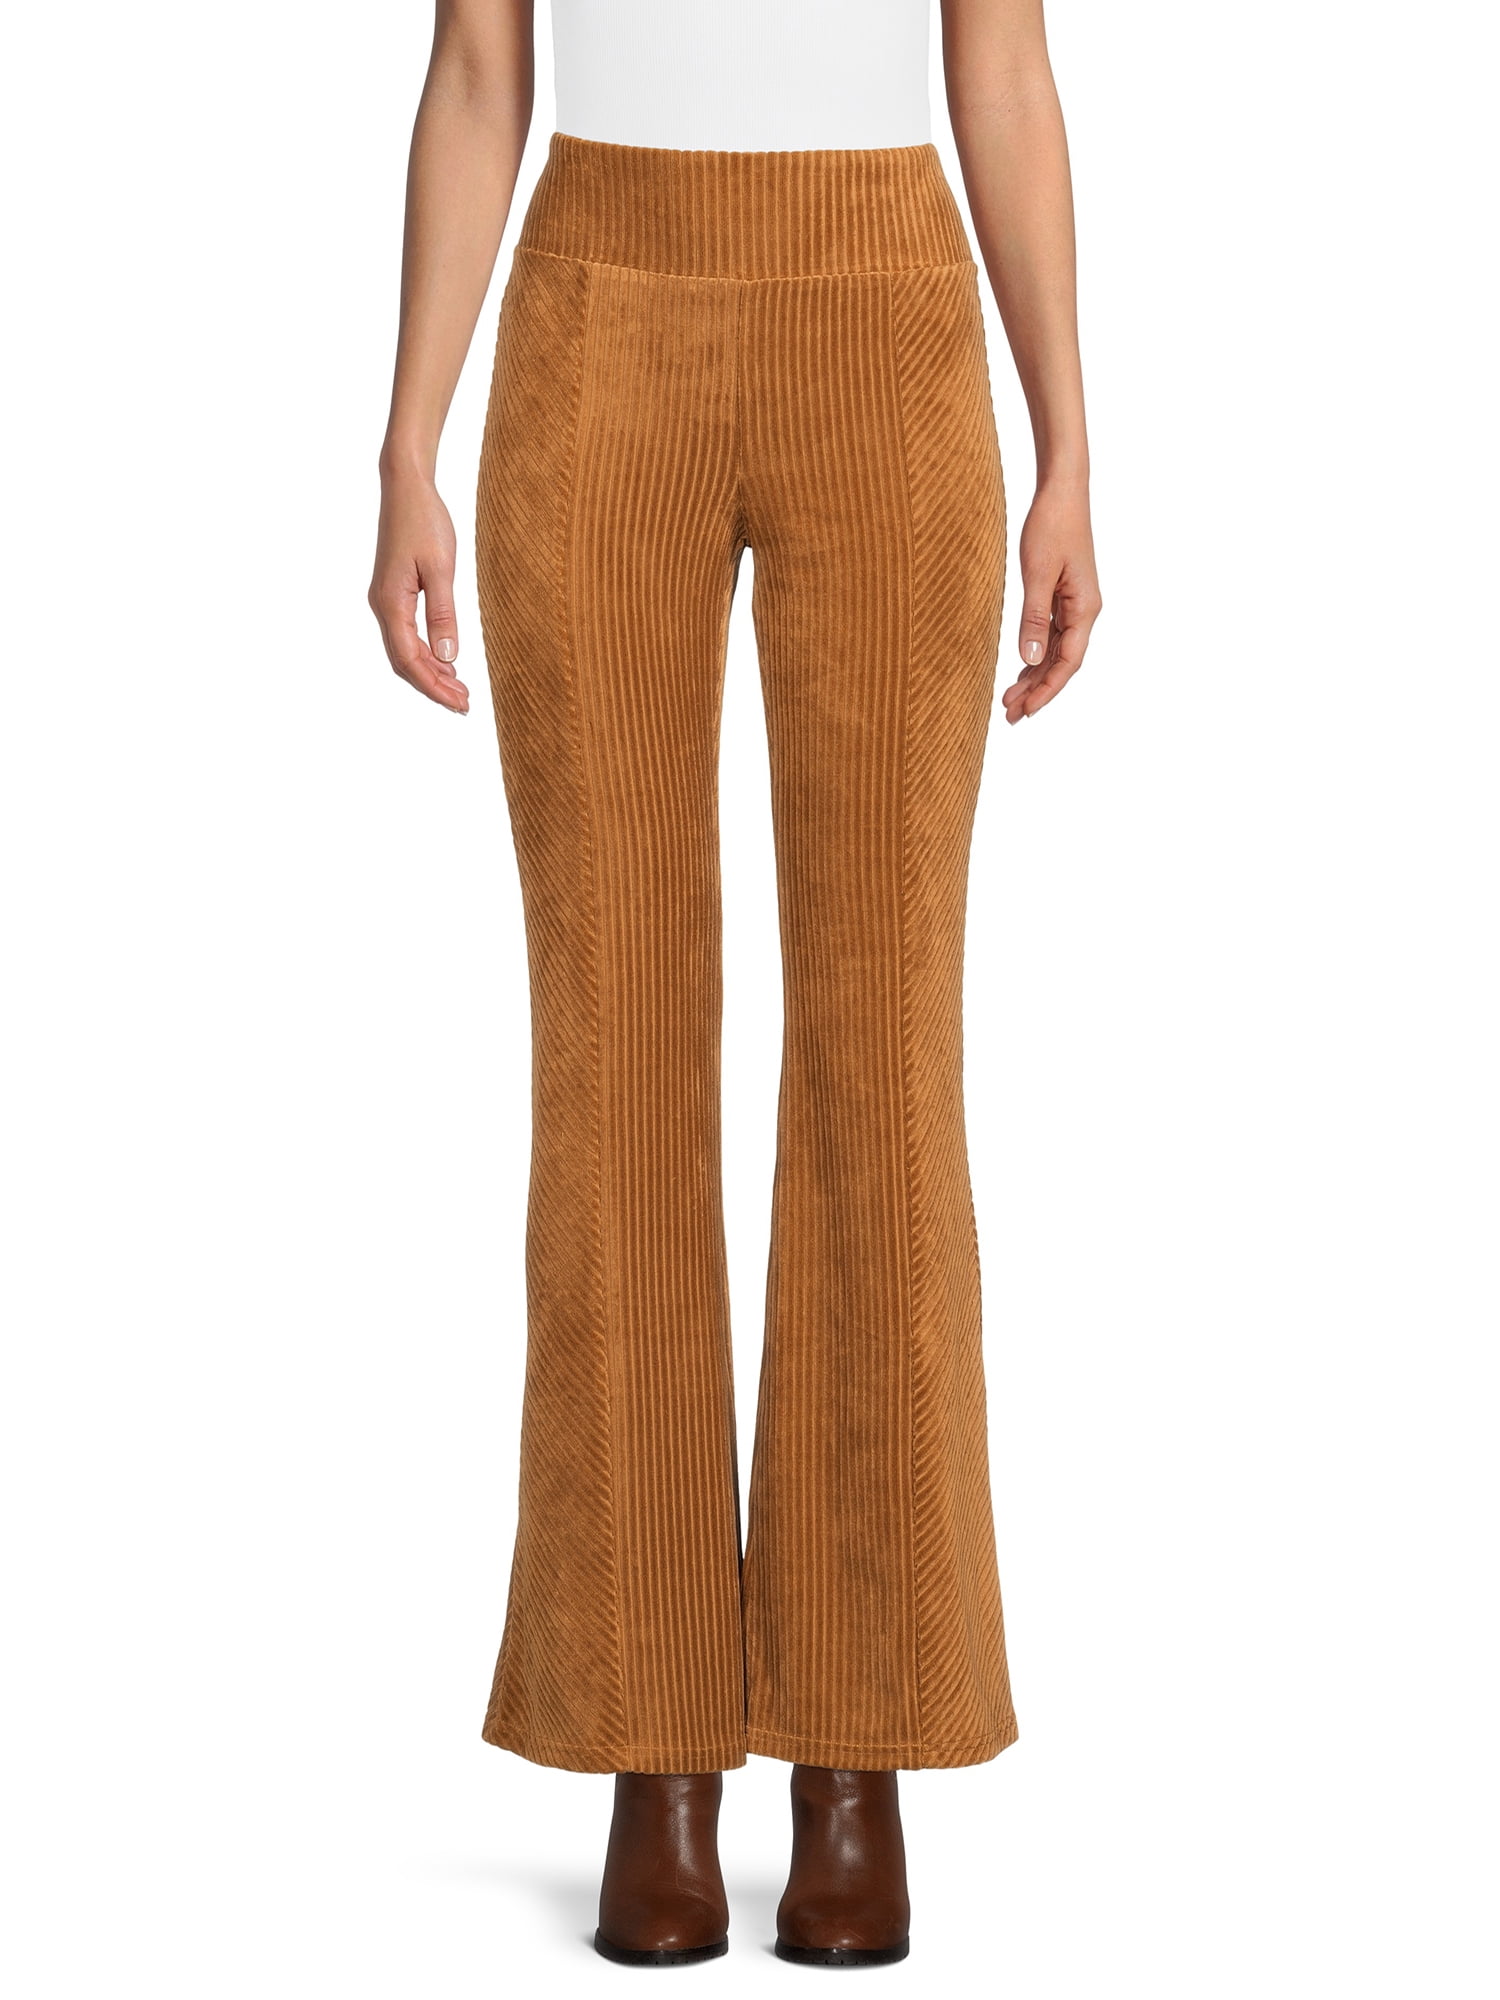 Fear of God Essentials Relaxed Cotton Corduroy Trousers | Nordstrom